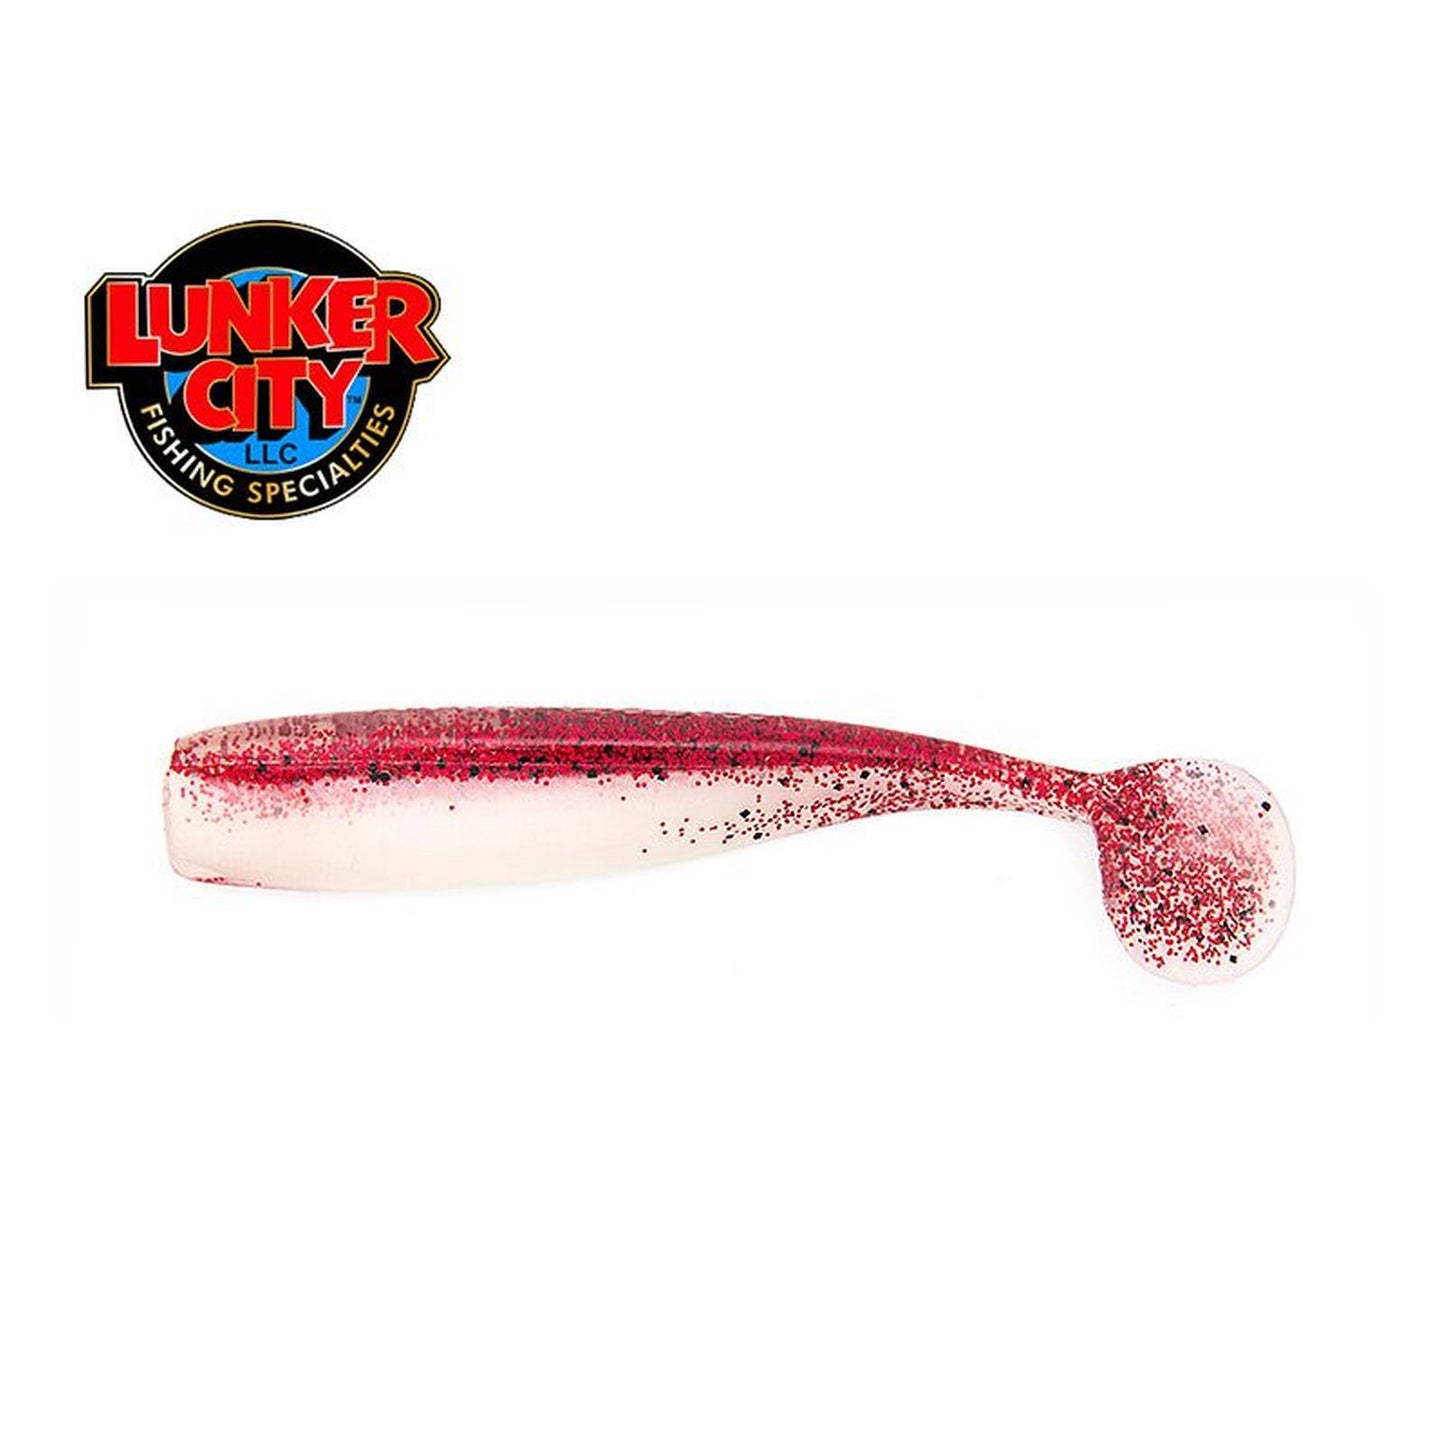 Lunker City Shaker Gummifisch Red Ice Shad